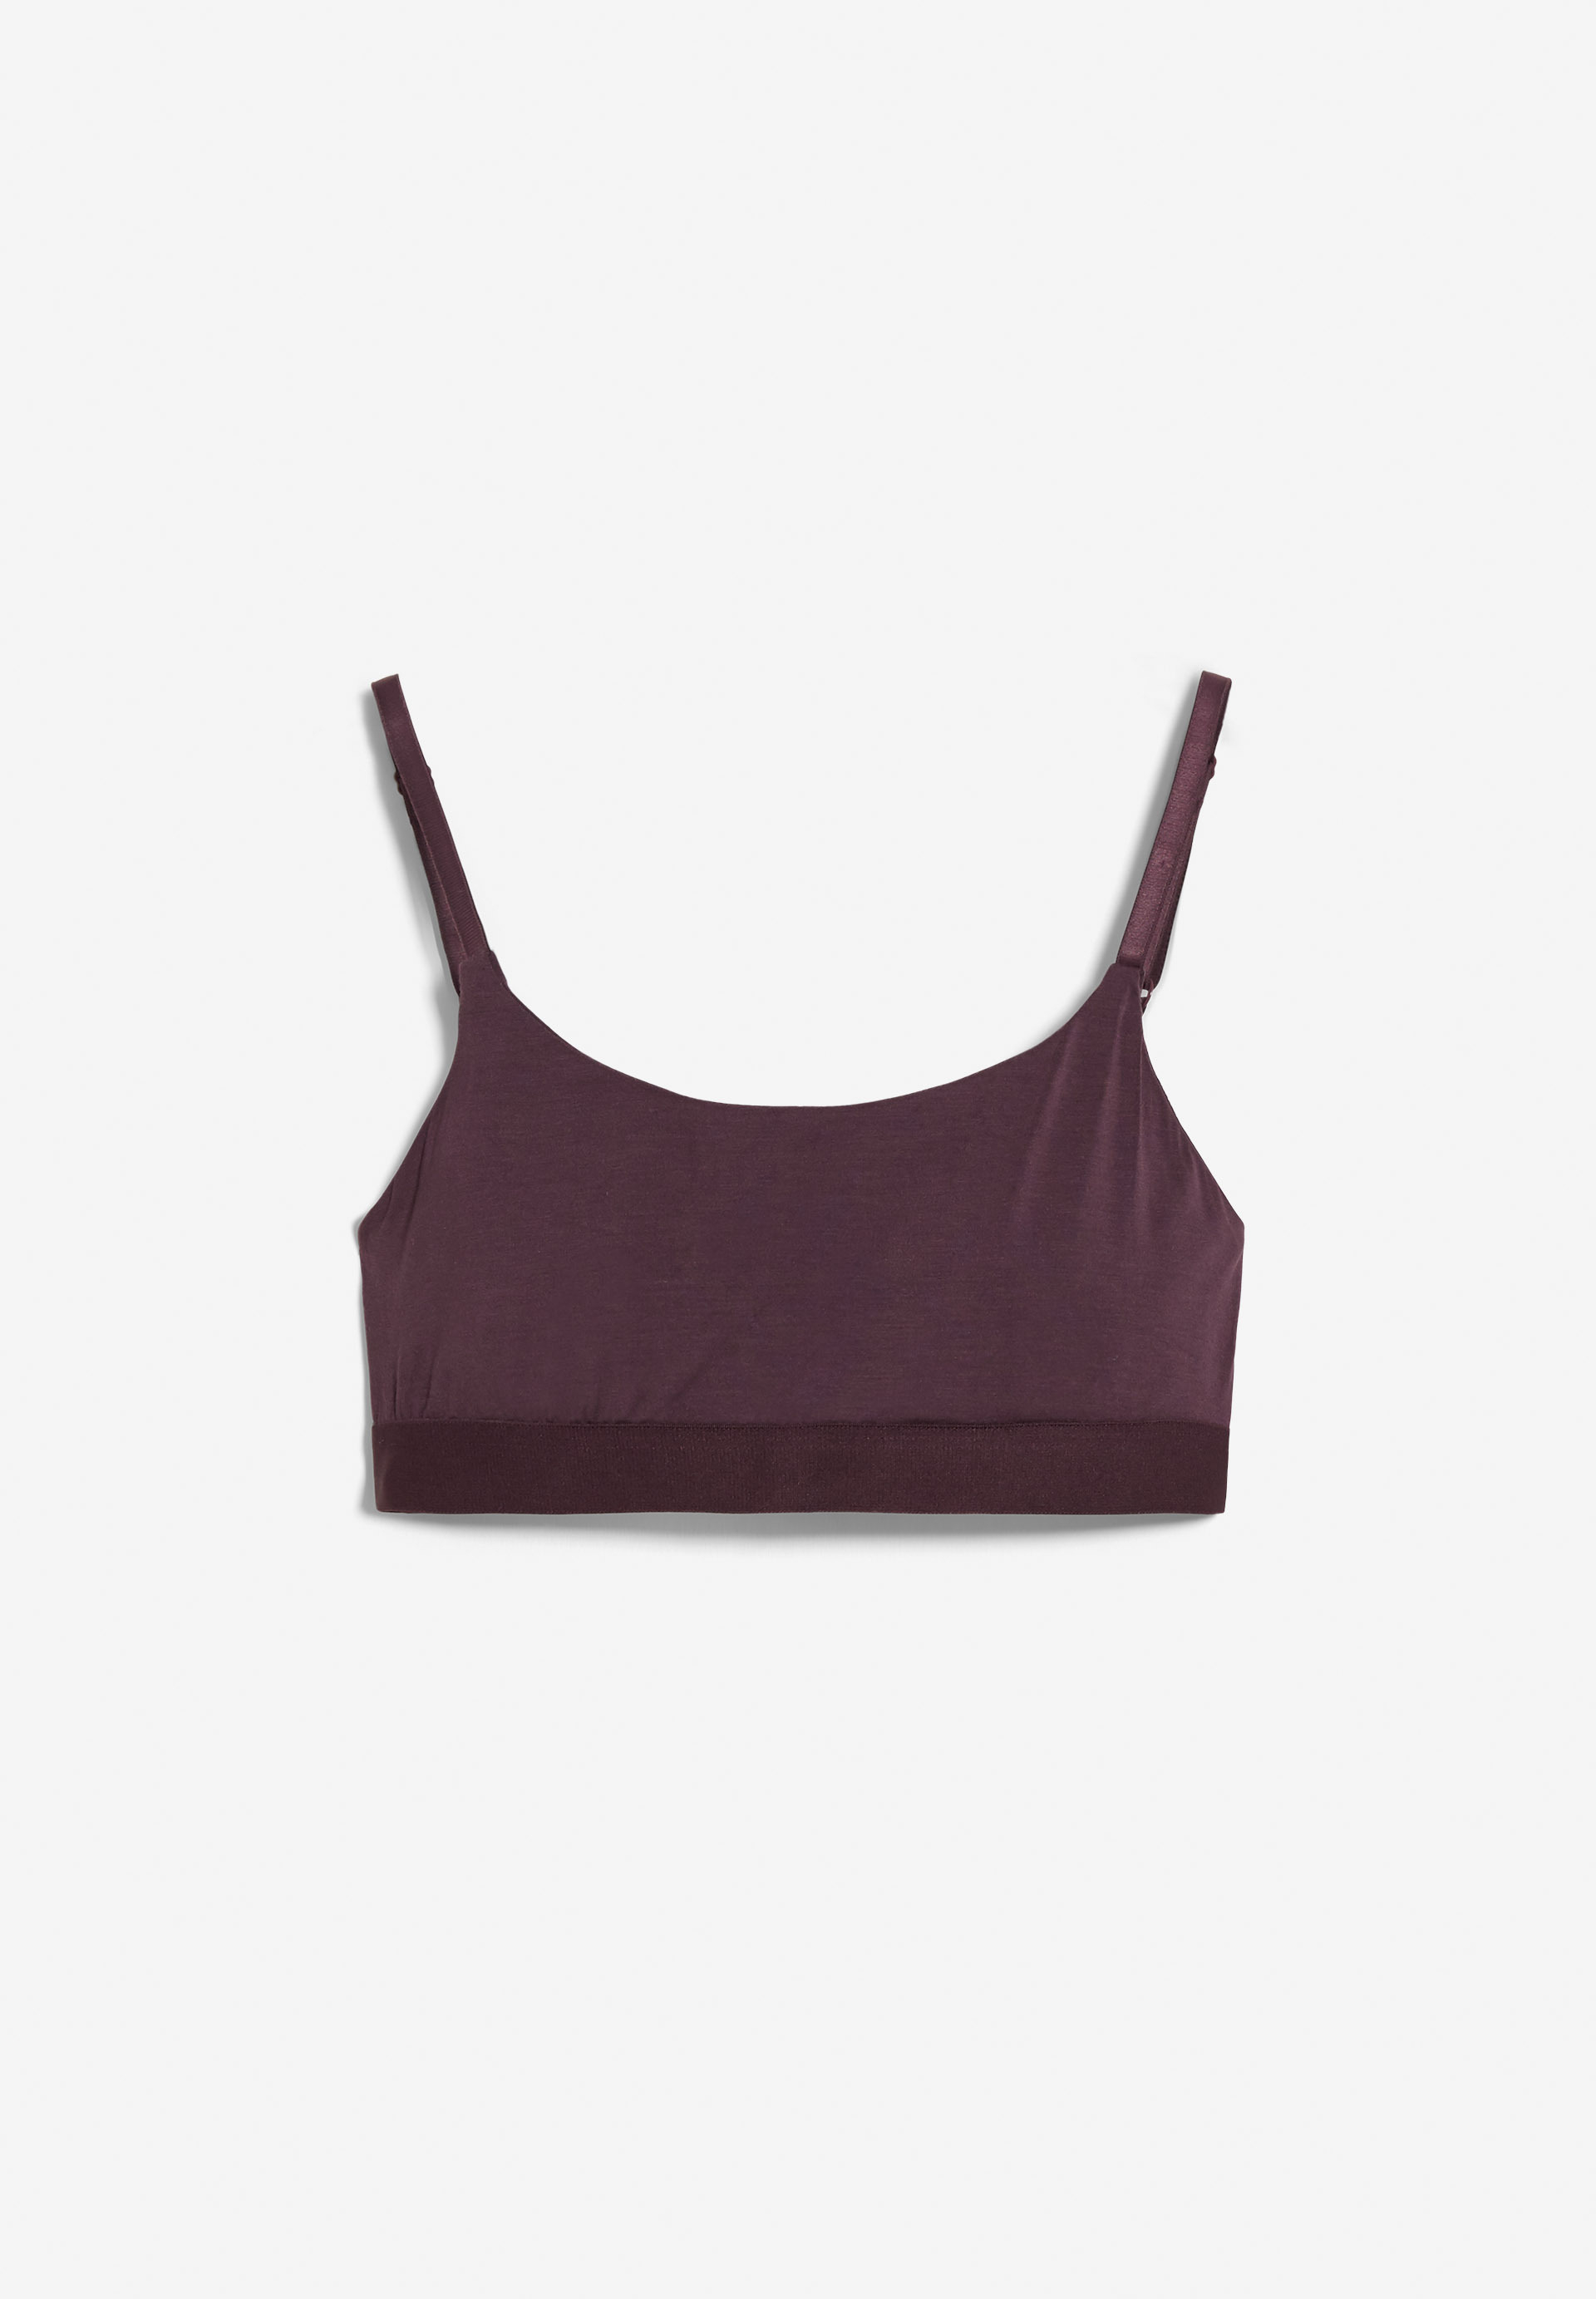 TOVAA BRALETTE MADE OF TENCEL™ MIX